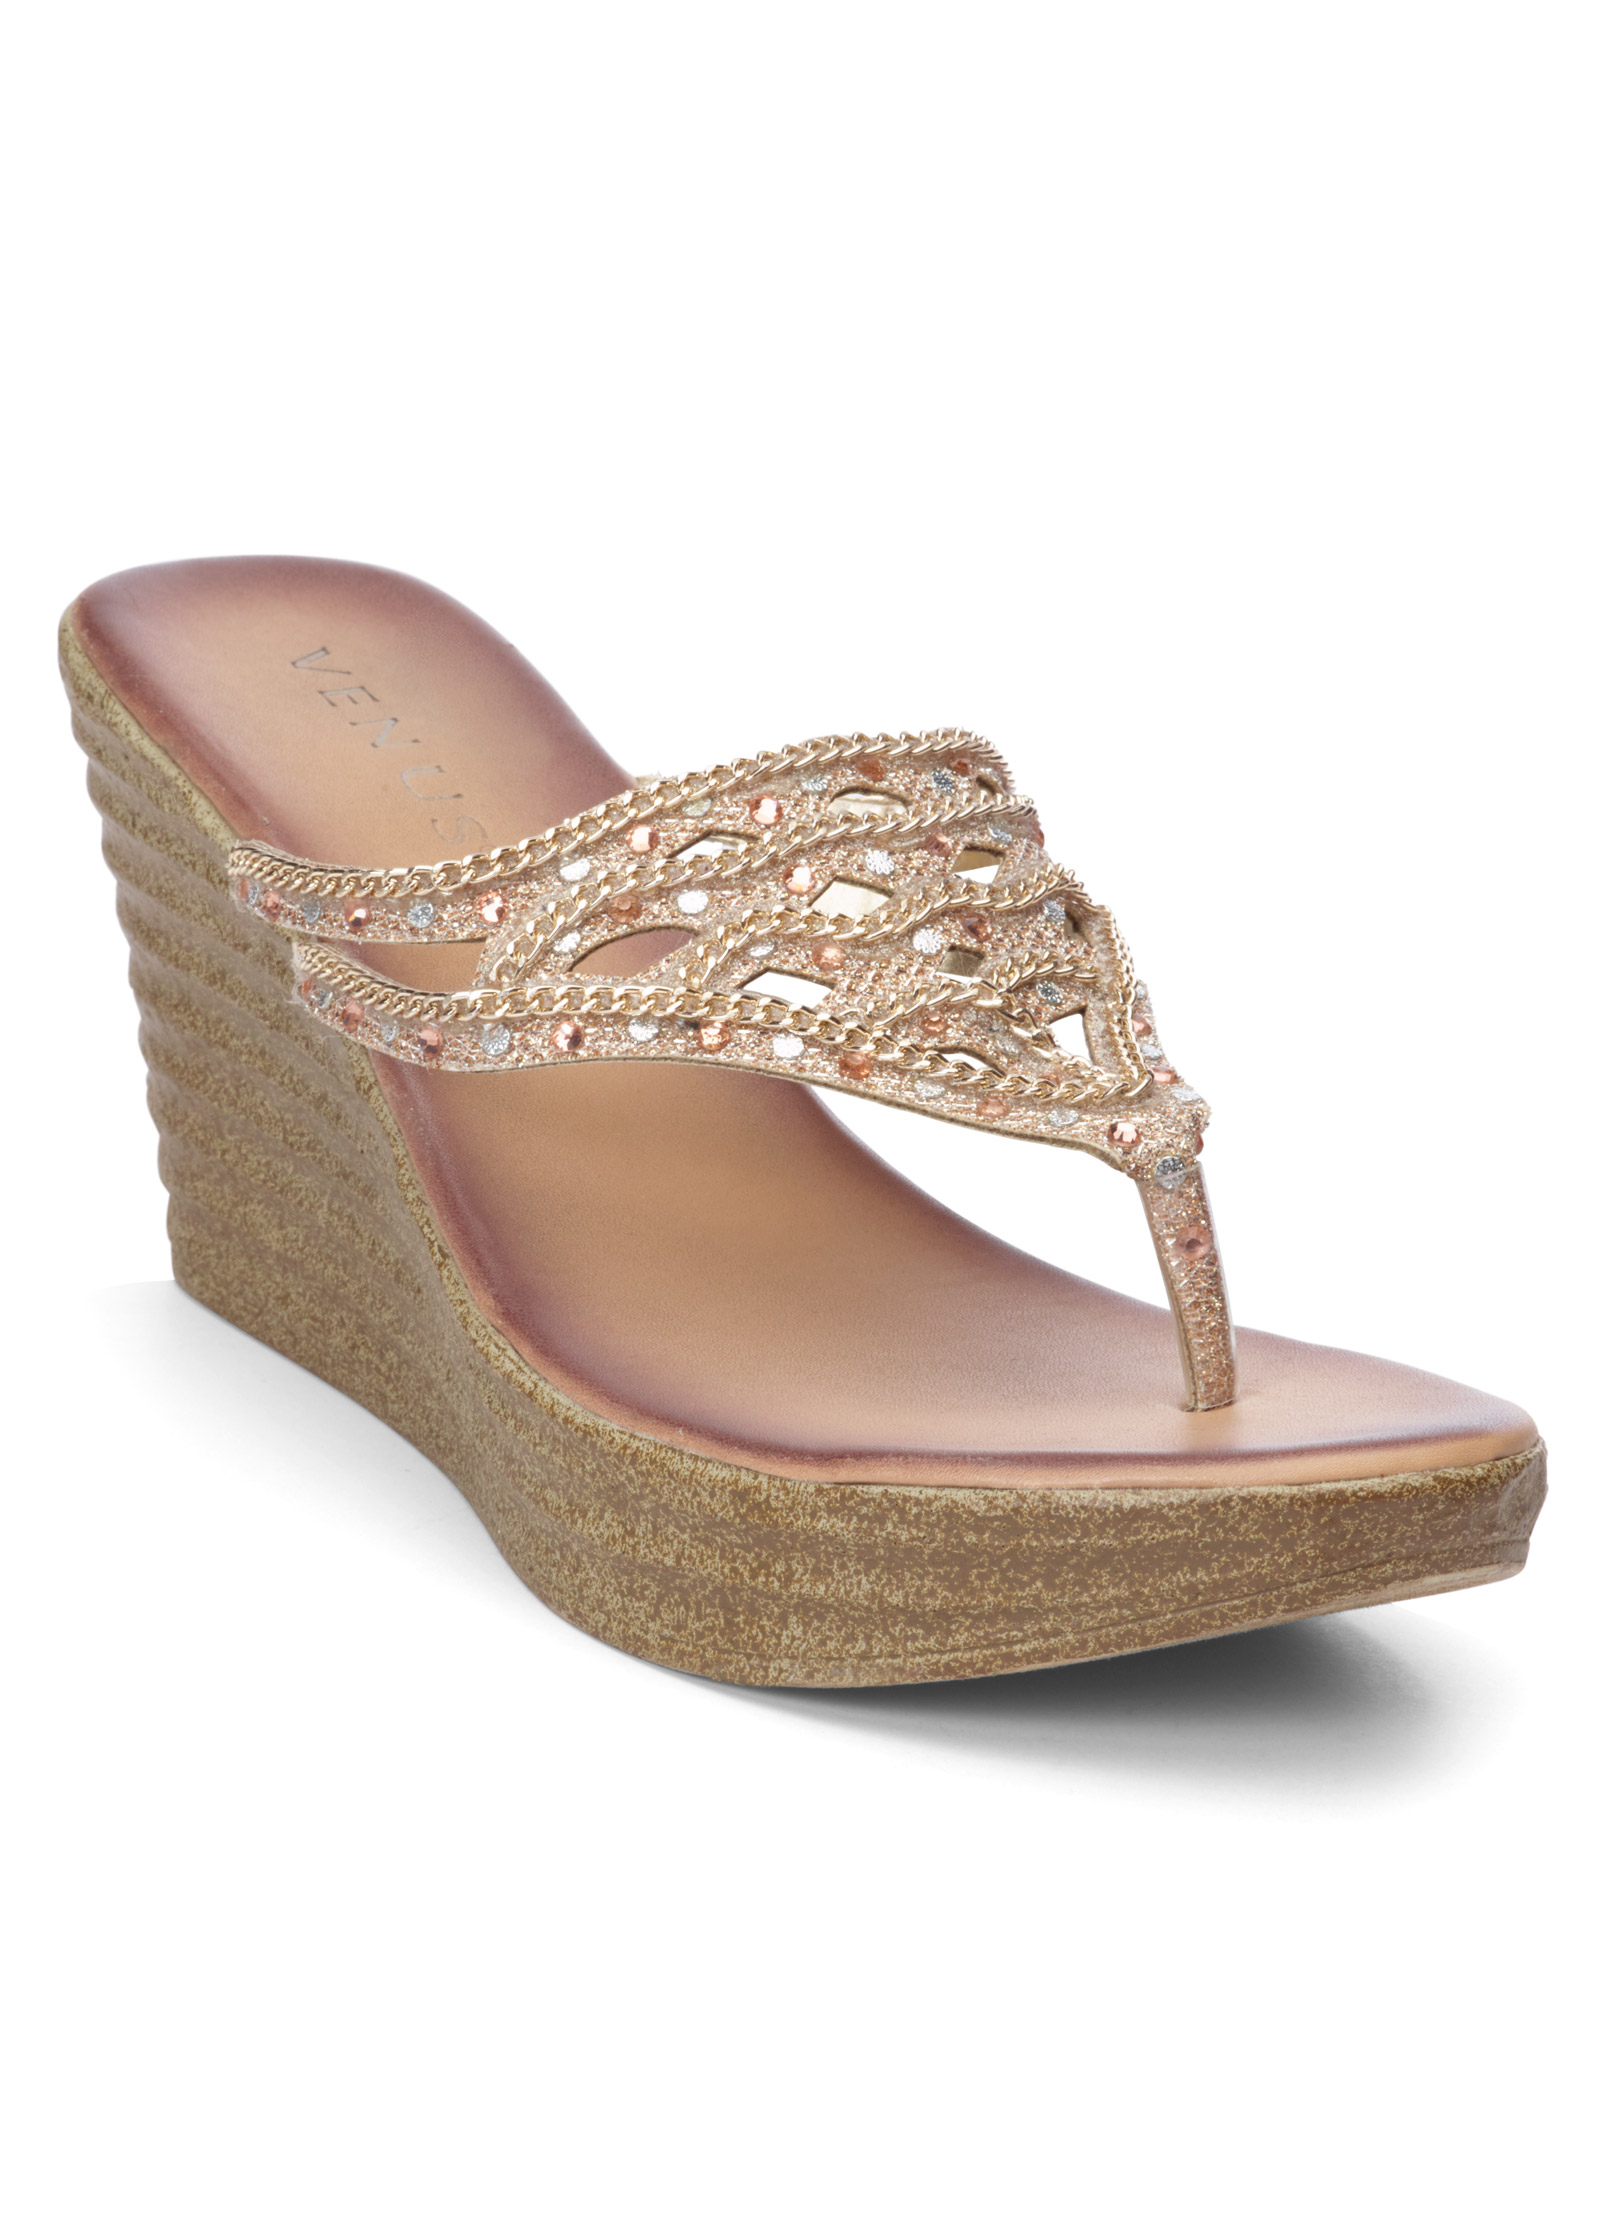 Women's Casual Shoes | Sandals, Wedges 